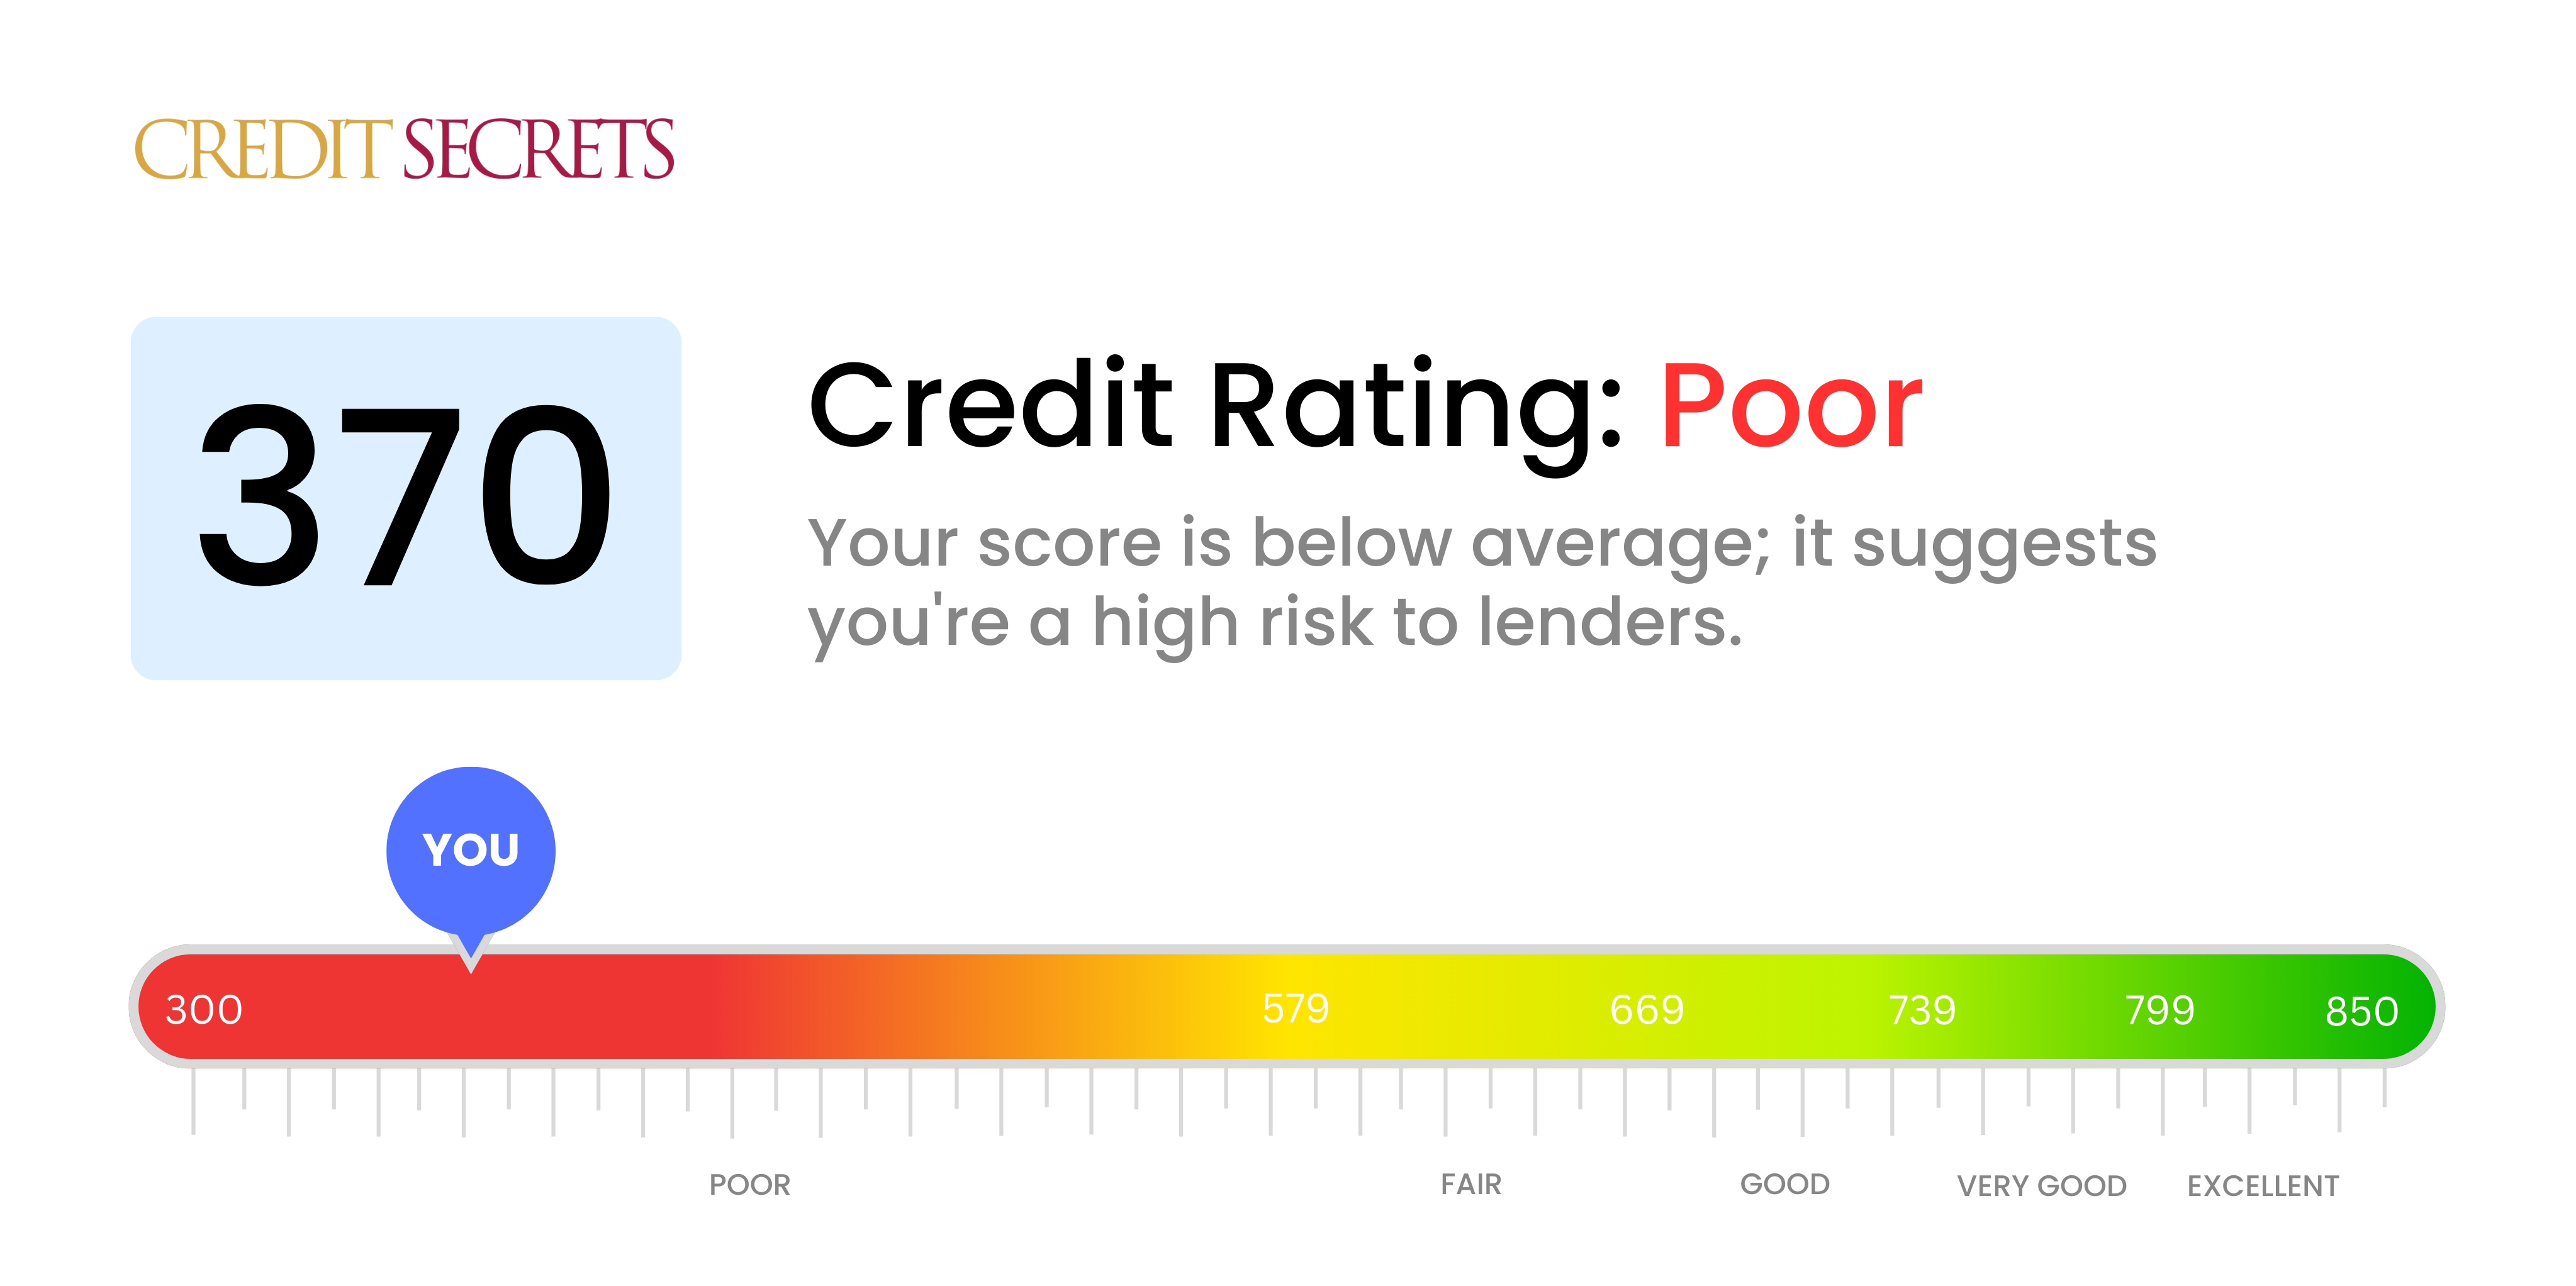 Is 370 a good credit score?